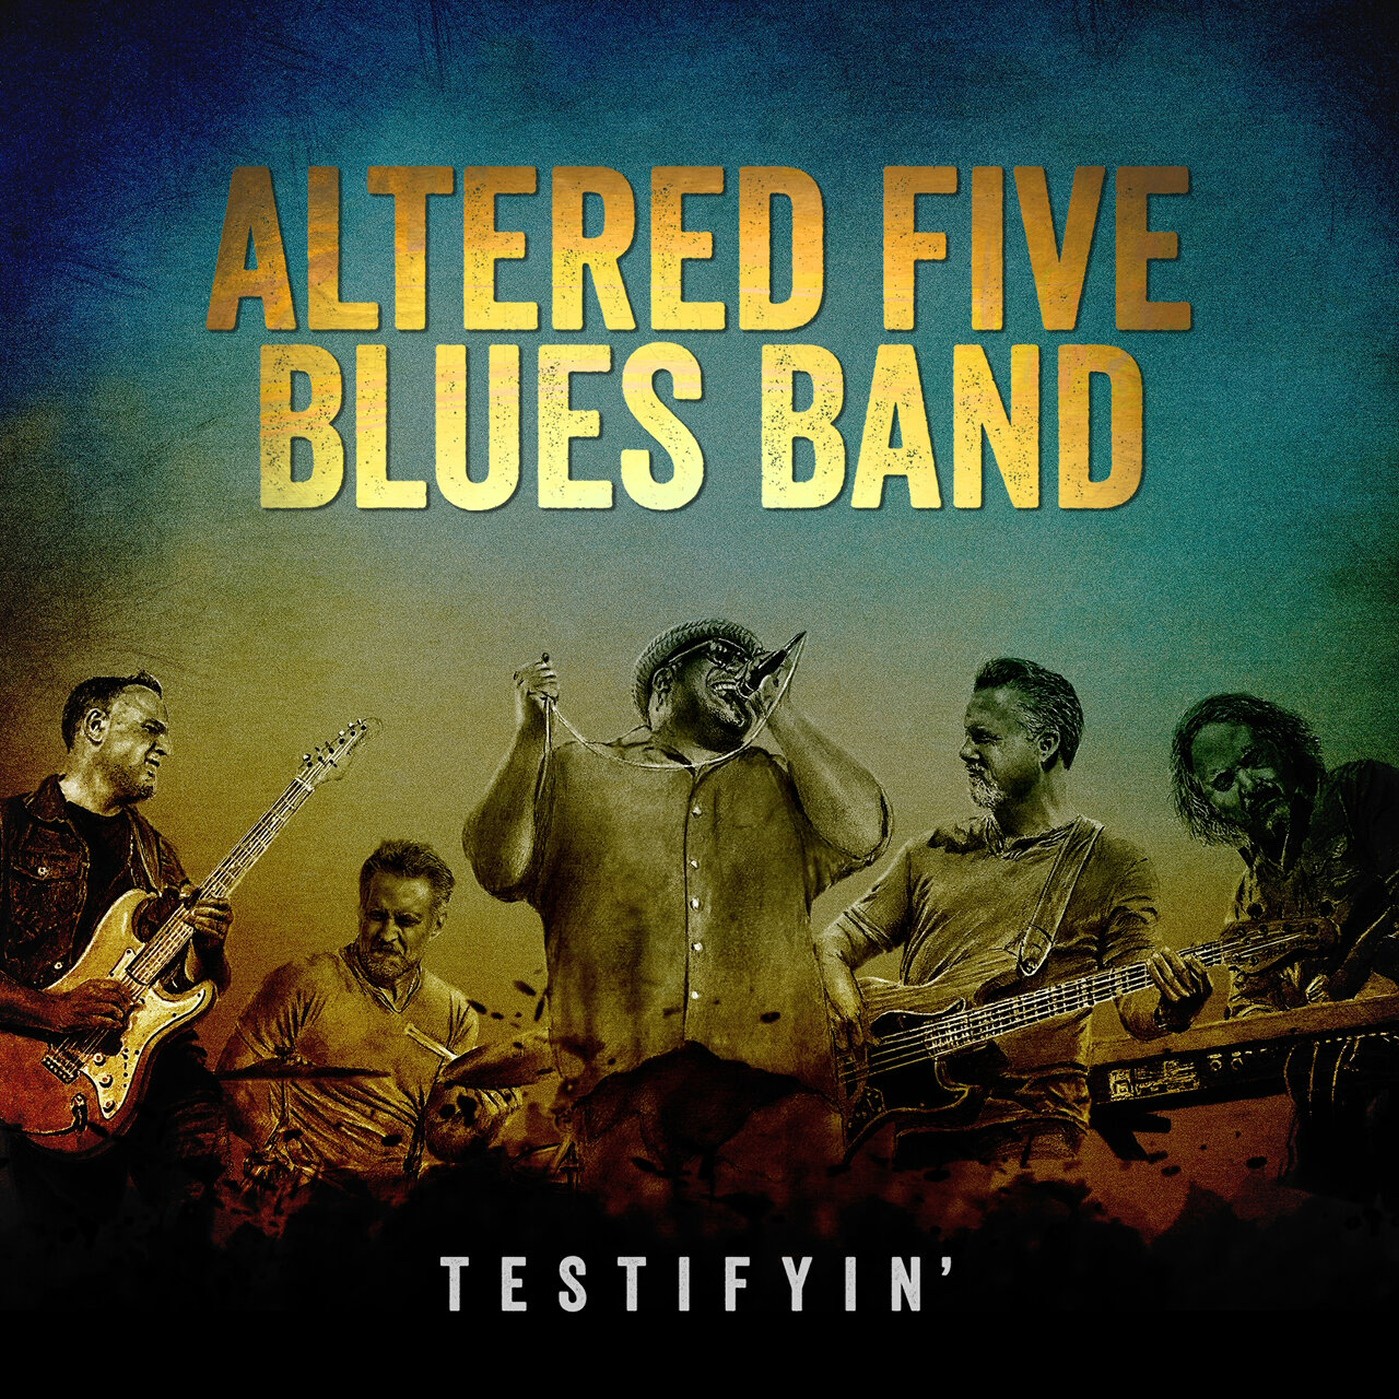 Altered Five Blues Band - Testifyin’